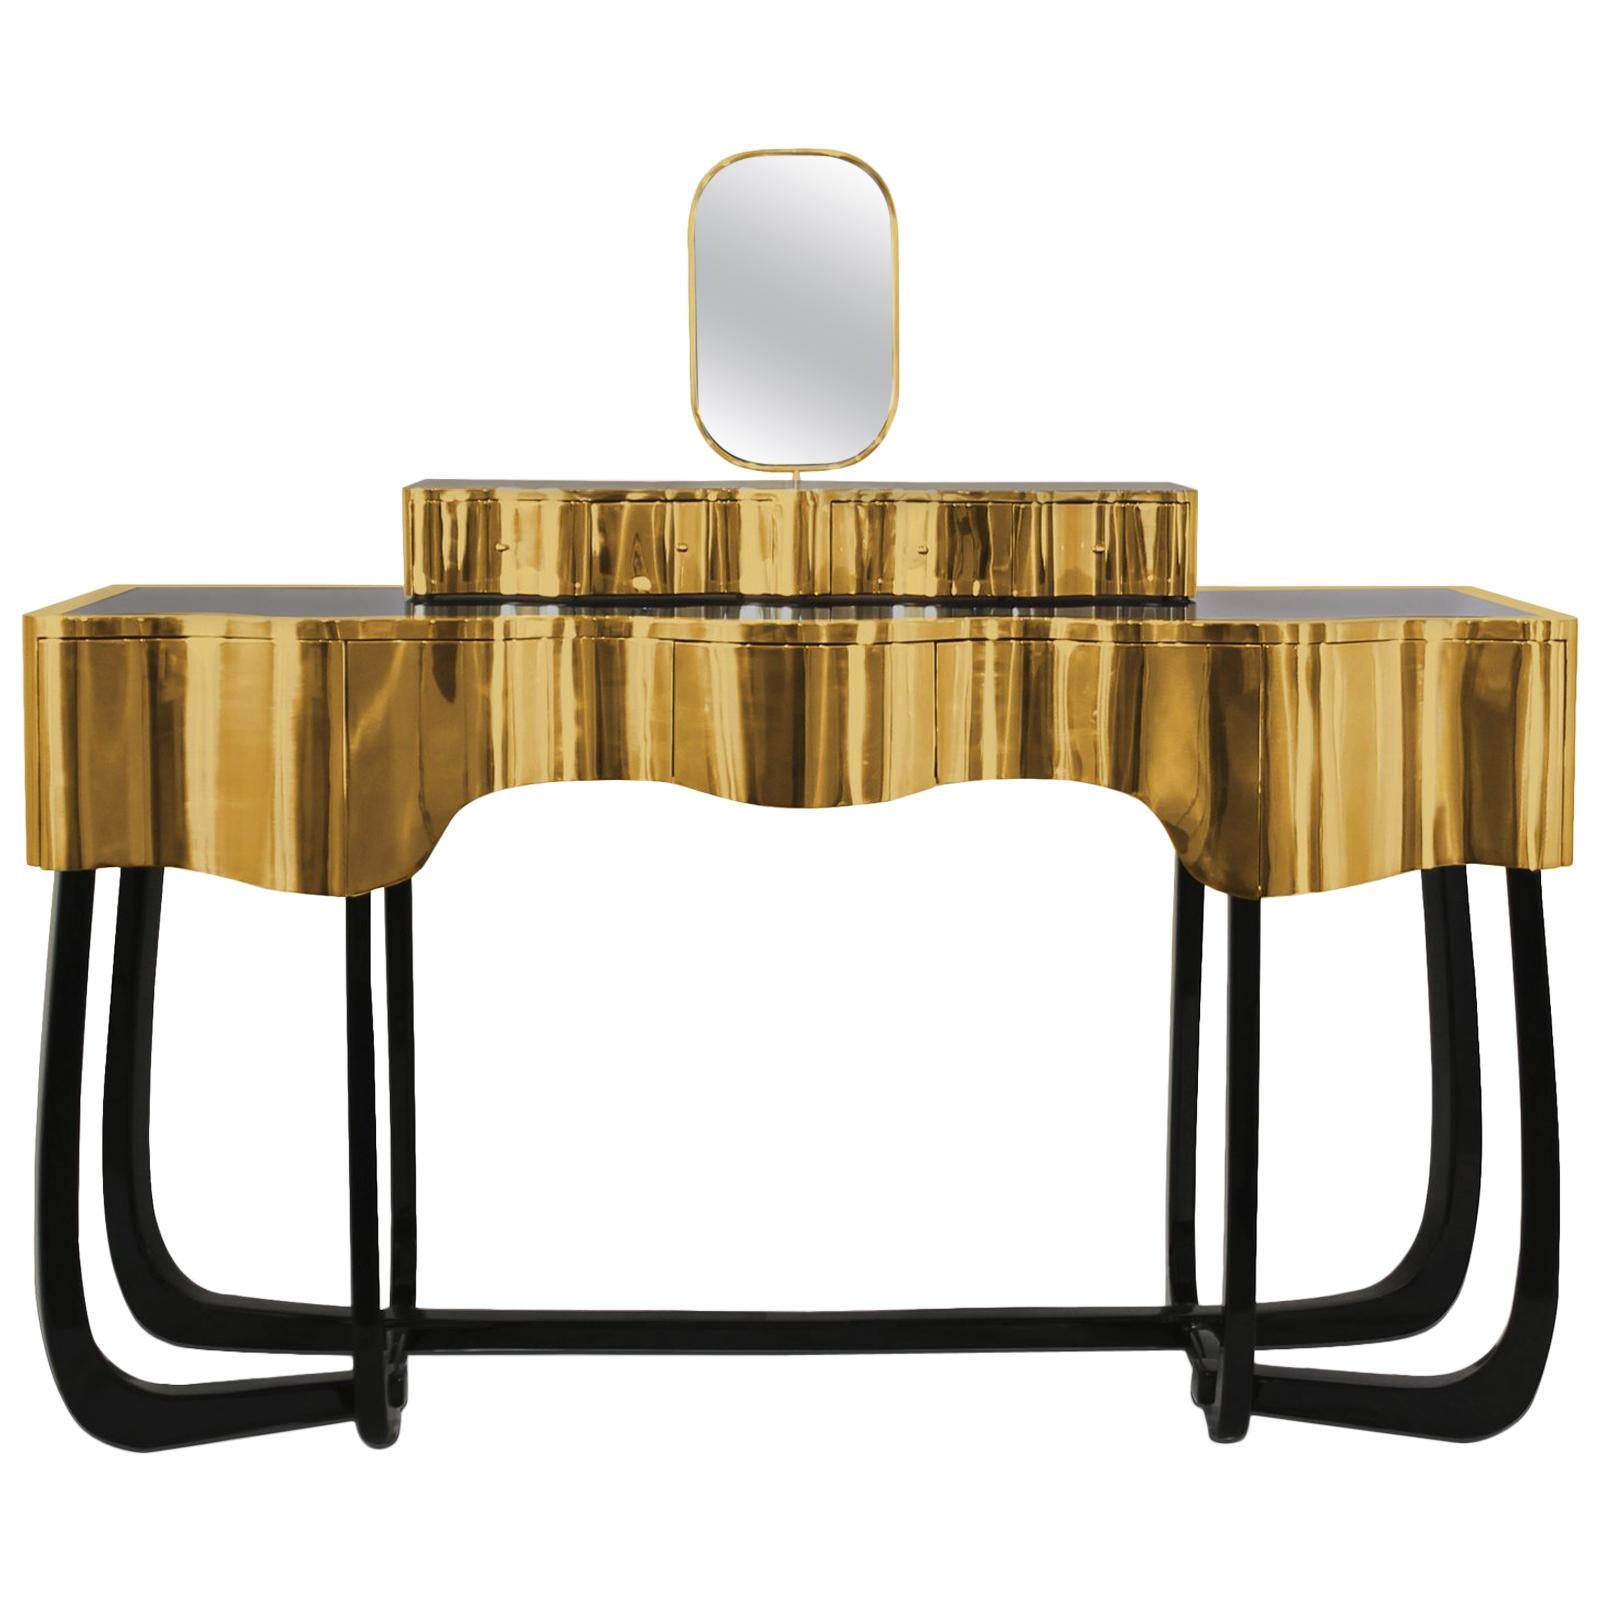 Curvy Mirror Room Console Table For Sale